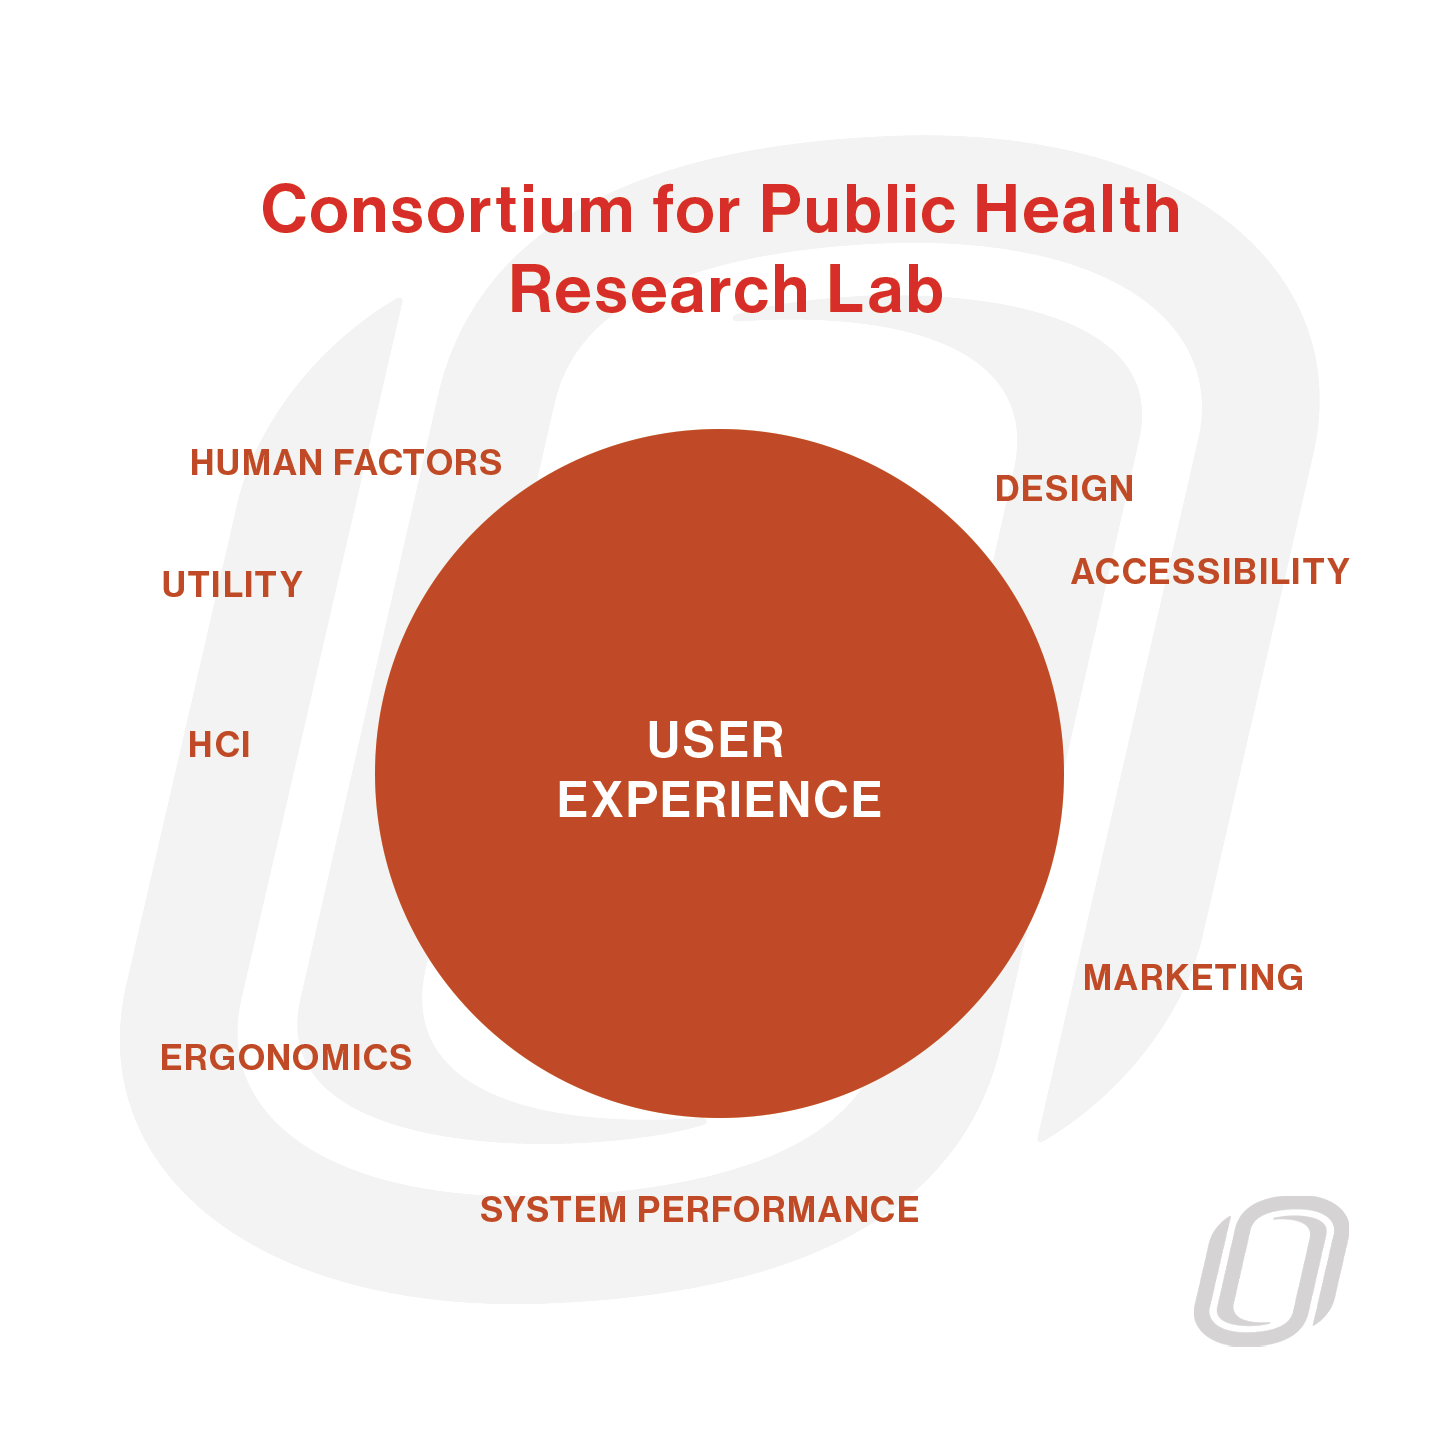 a circular chart labeled user experience with keywords to describe usability research surrounding the circle, with a title "Consortium for Public Health Research Lab"